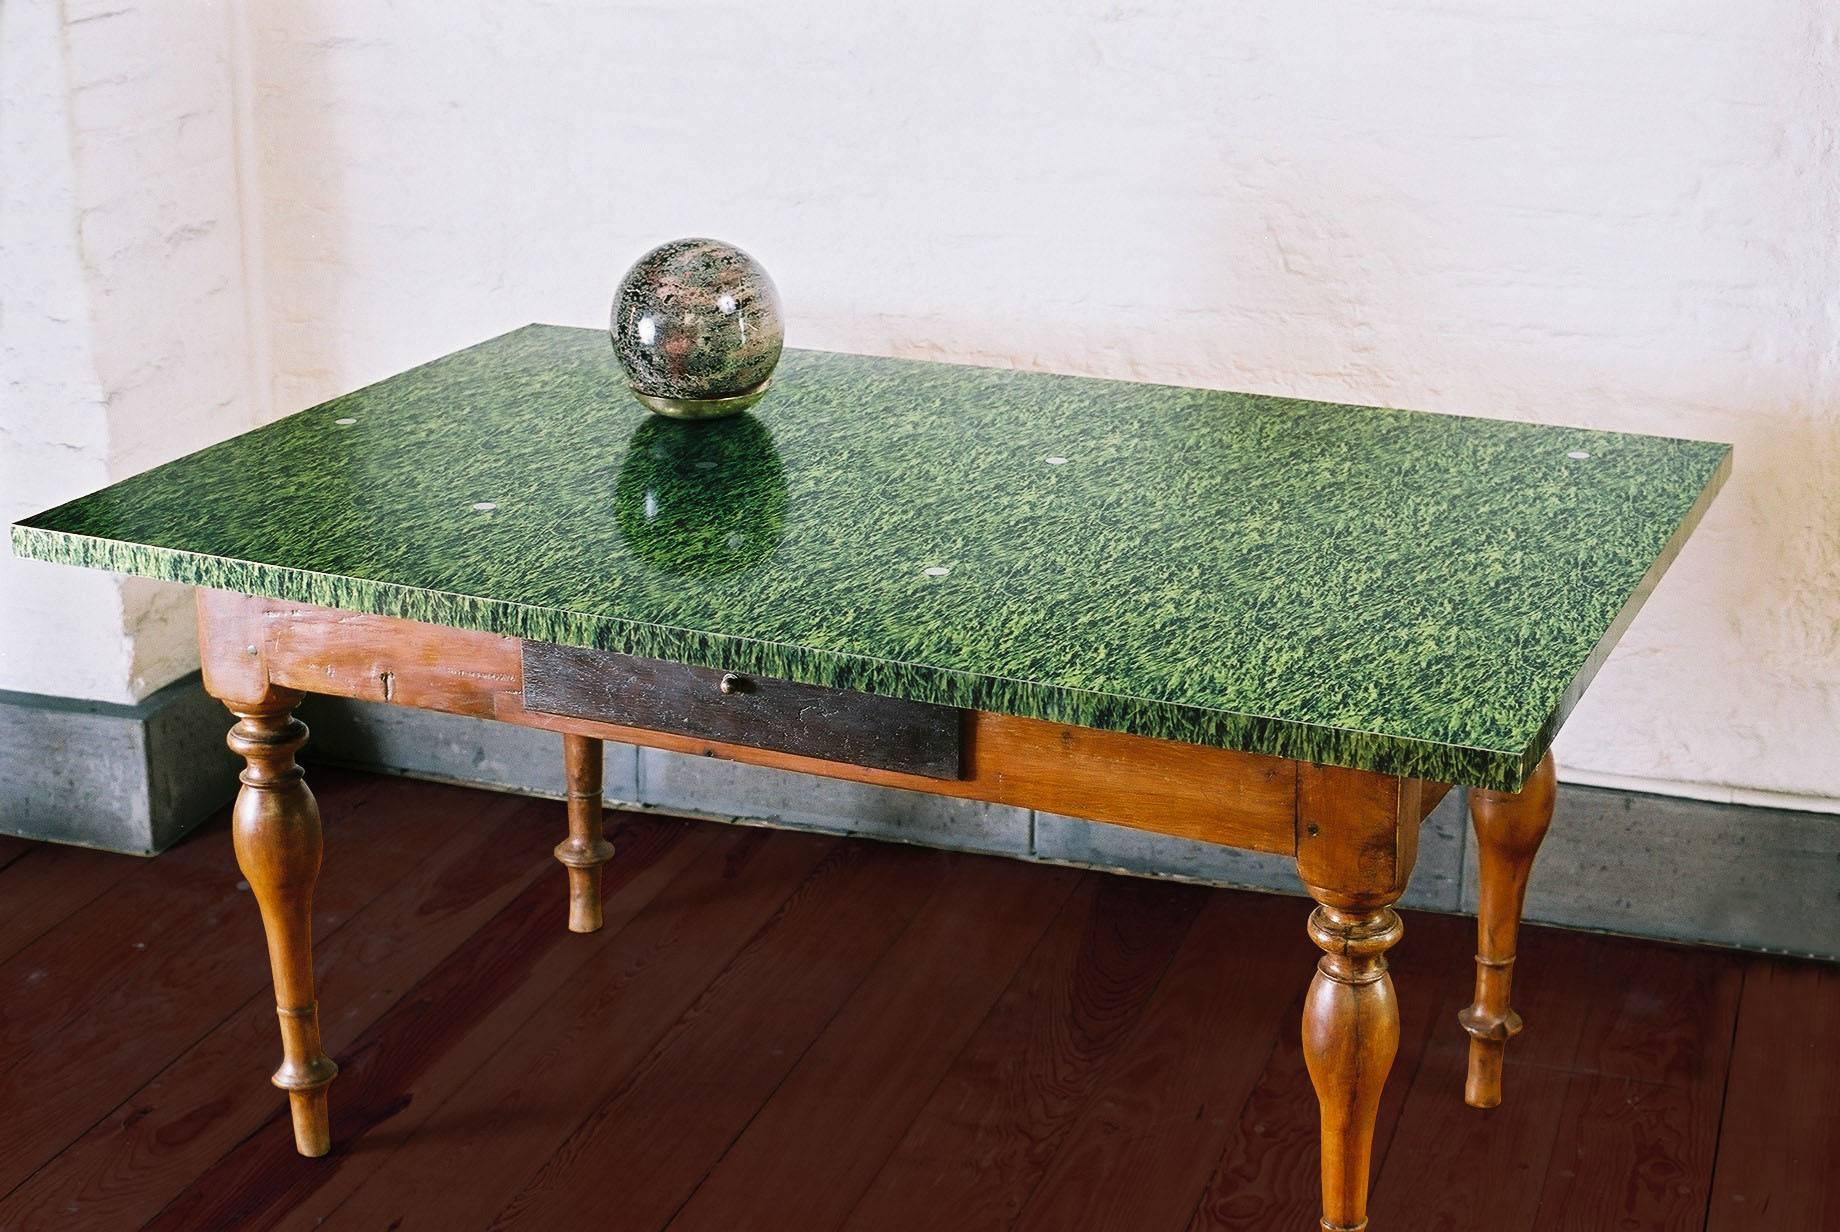 19th century table made of turned cedar wood, covered with a sheet metal plate with printed grass and silver handle.